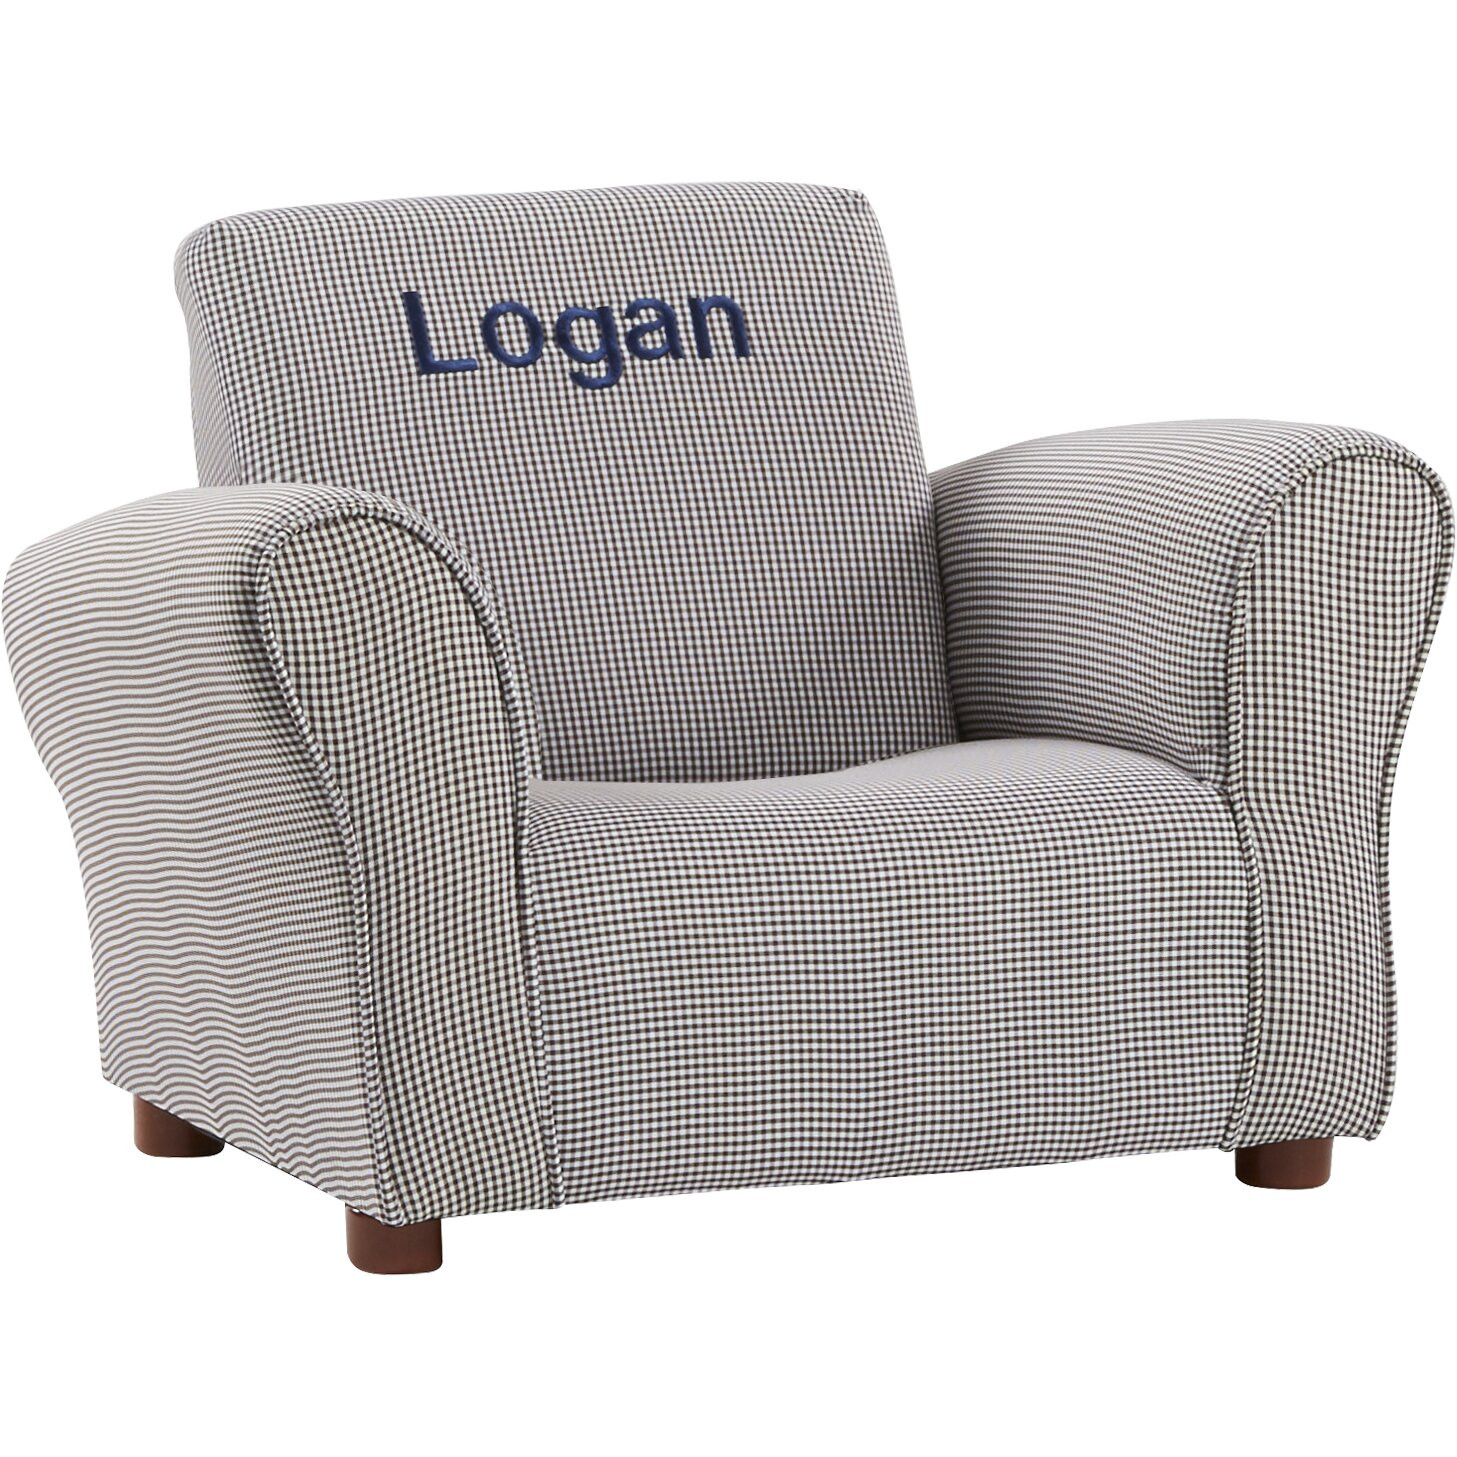 Personalized Kids Chair
 Little Furniture Personalized Kids Club Chair